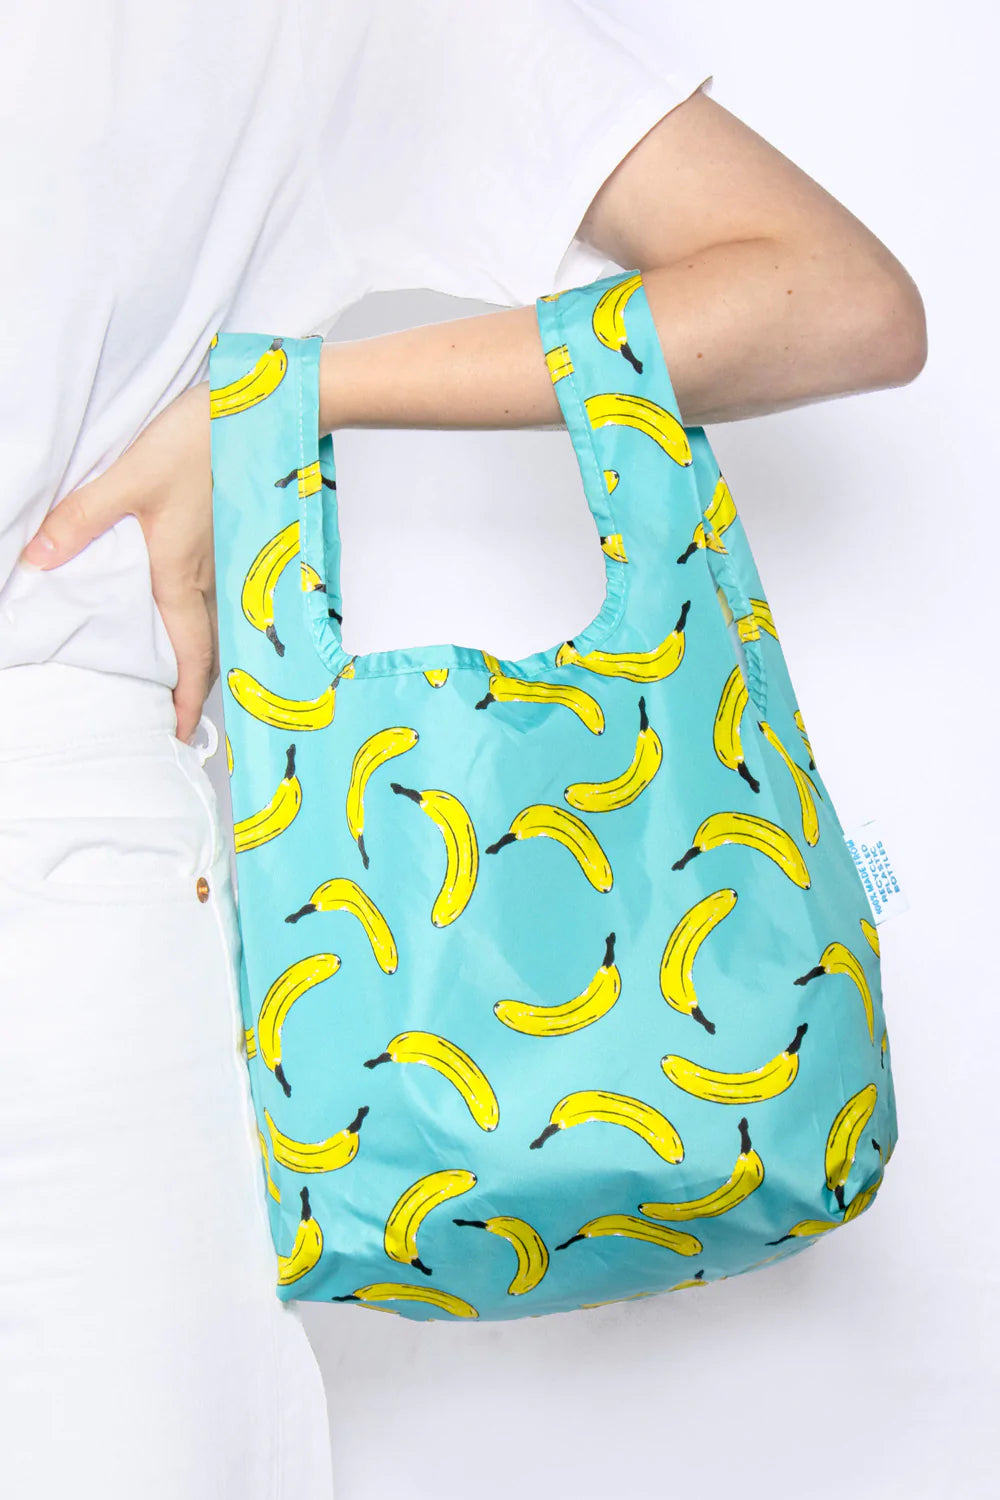 Kind Shopping Bags - Made 100% from Recycles plastic bottles